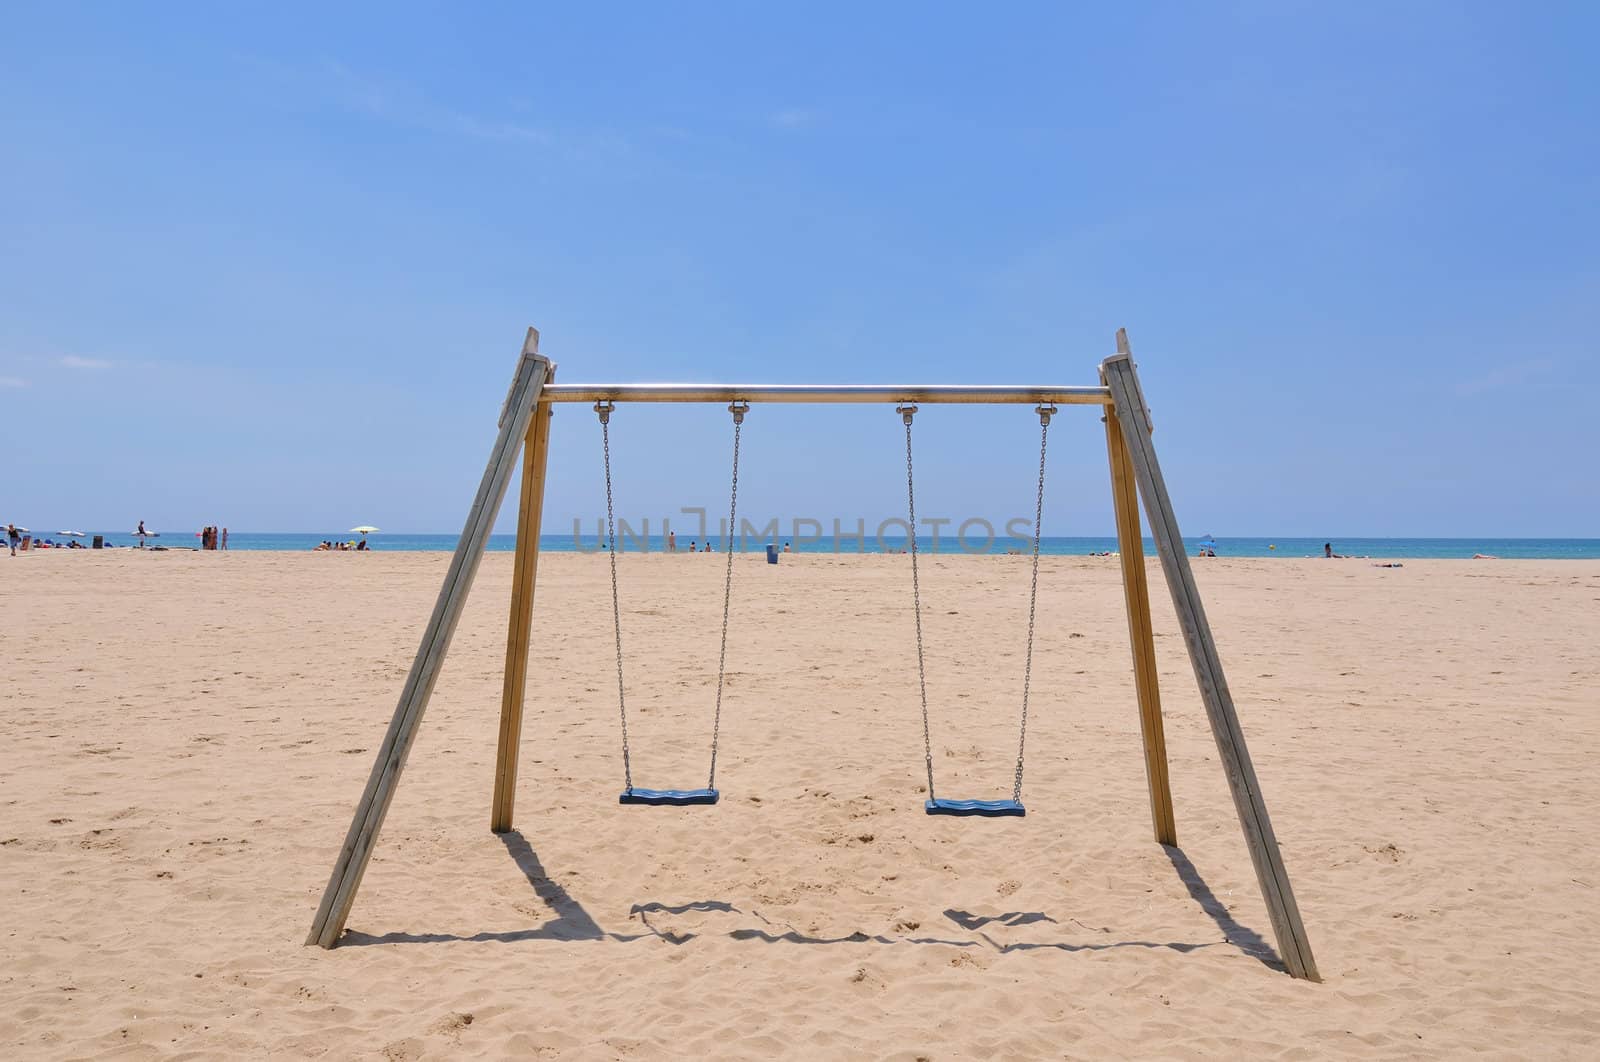 double beach swing over sand and blue sky background, Spain